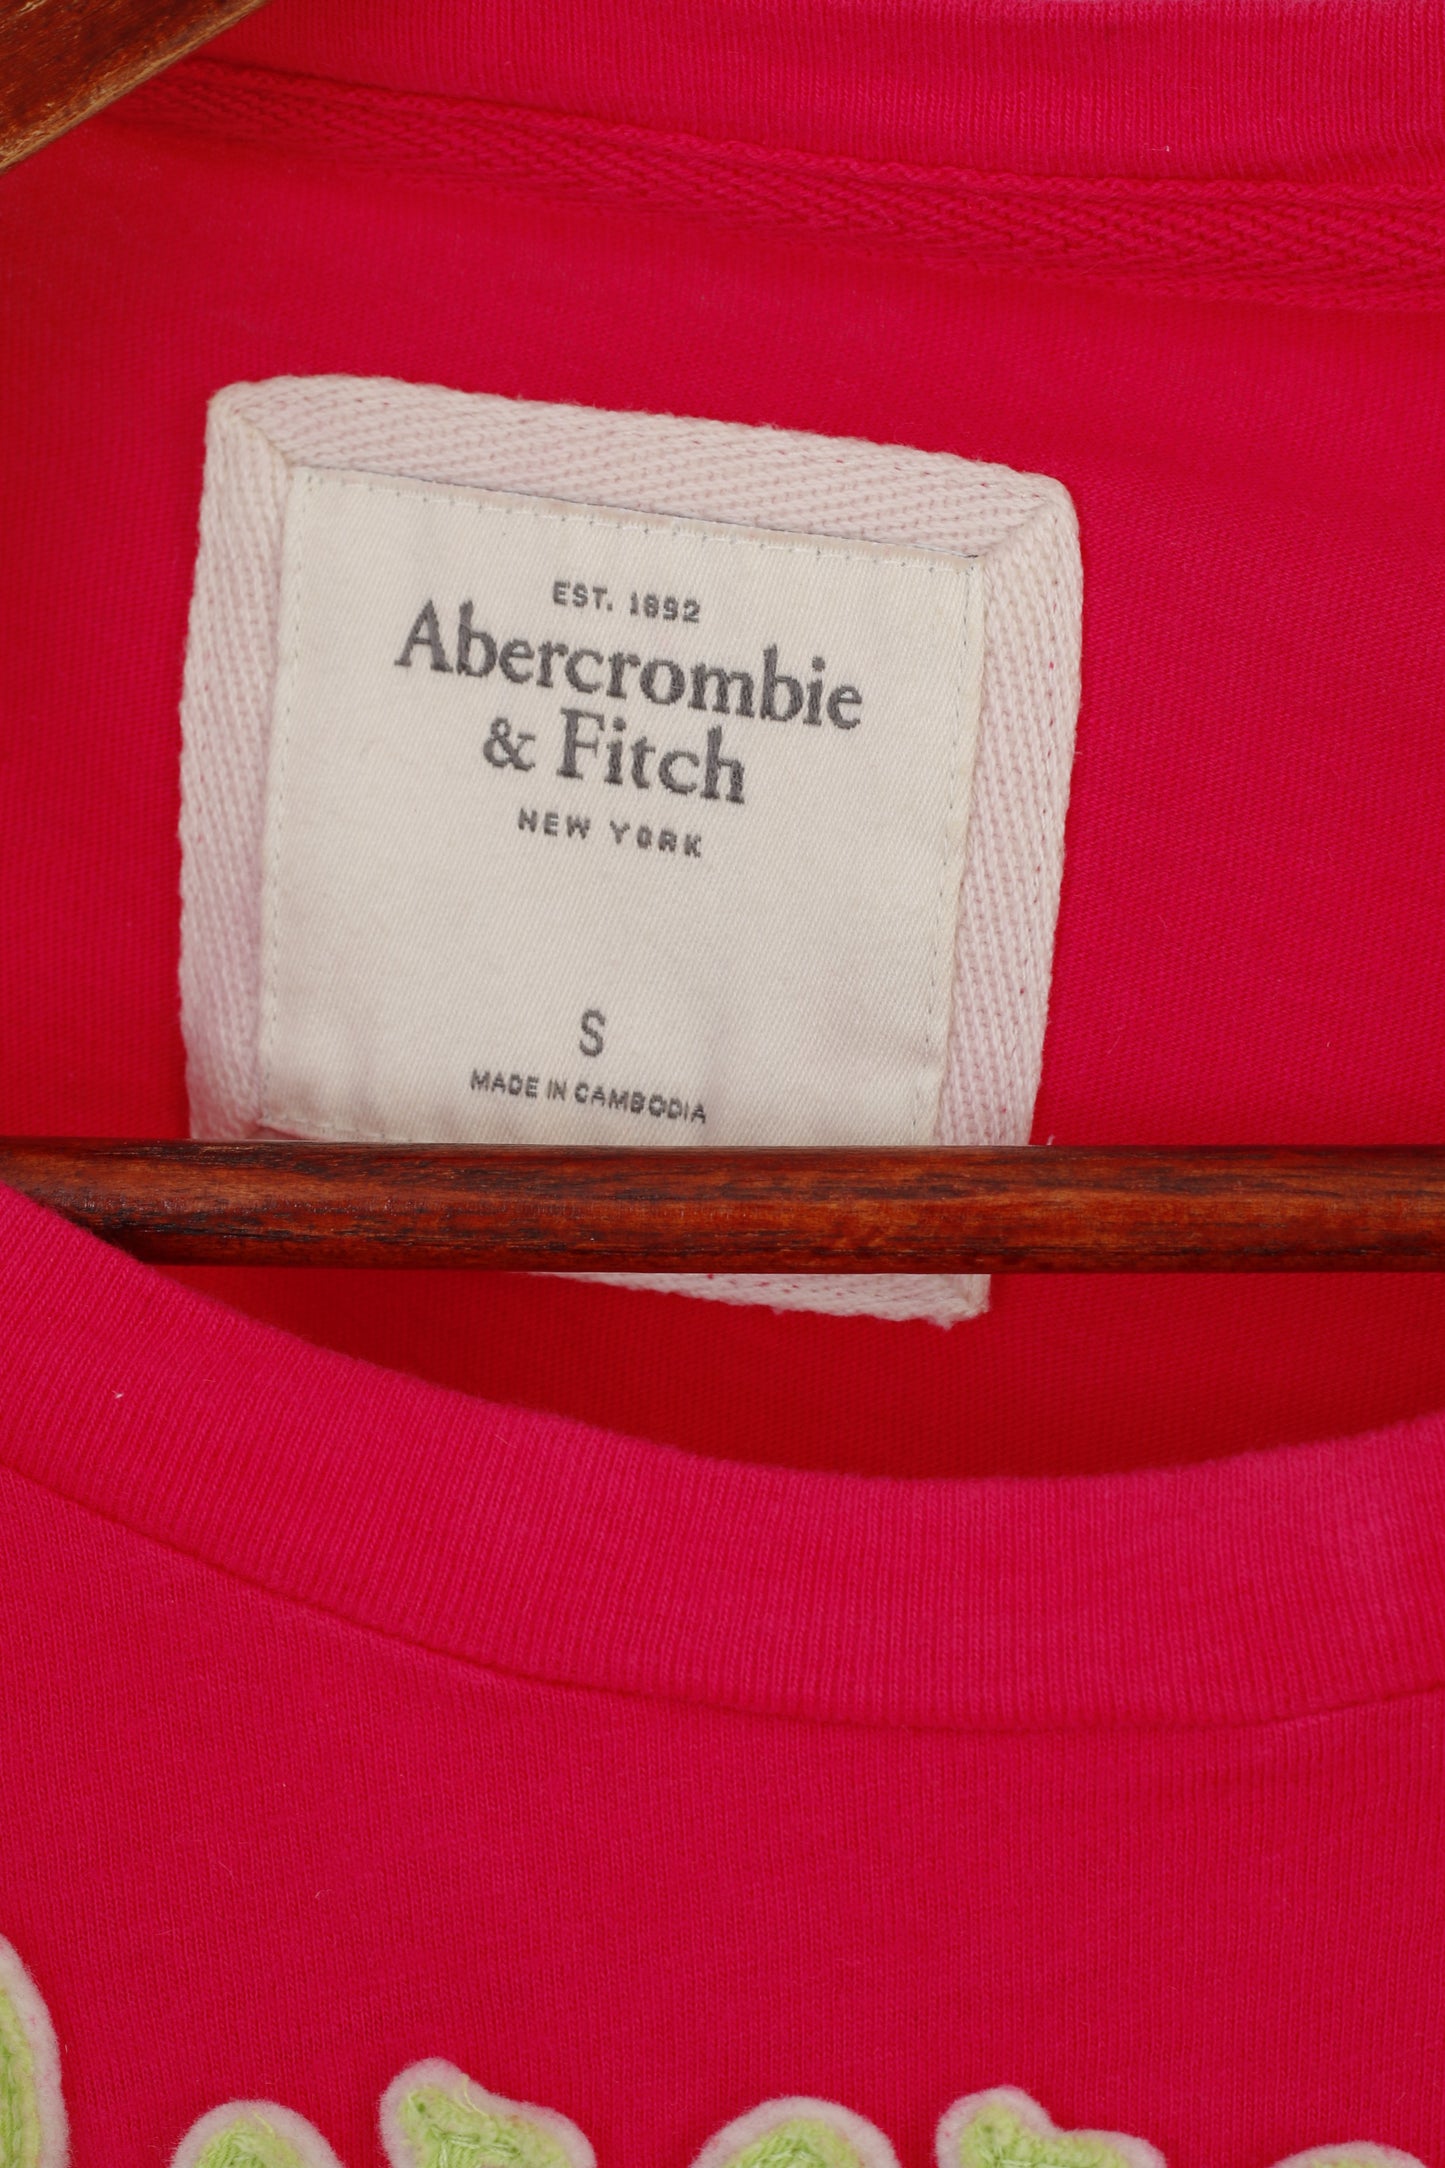 Abercrombie & Fitch Women S Shirt Pink Cotton Slim Fit Stretch Crew Neck Top